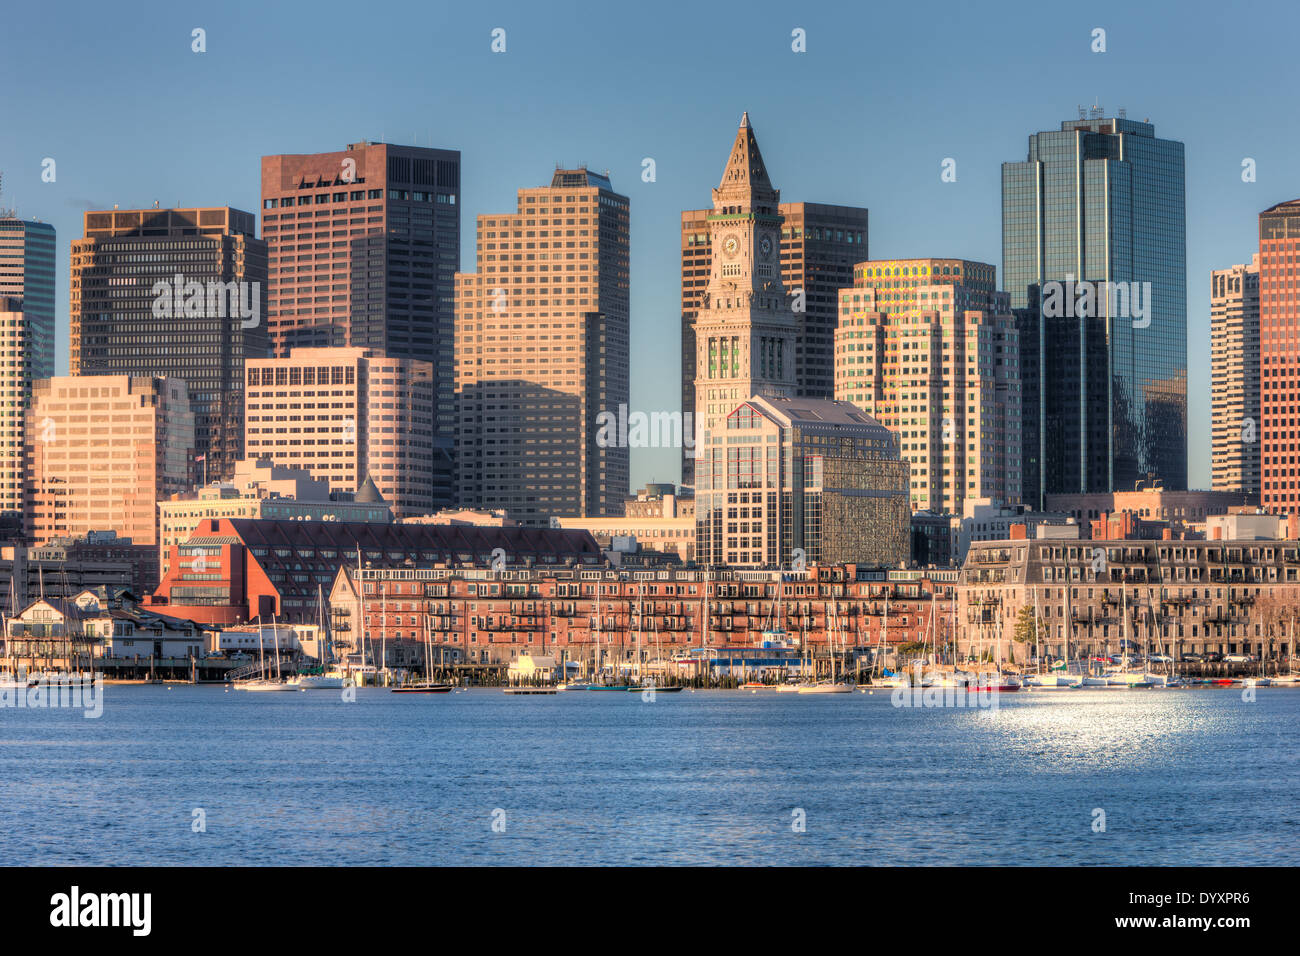 A morning view of the Custom House Tower, the Financial District, and low rise wharves on the waterfront in Boston, Massachusetts. Stock Photo